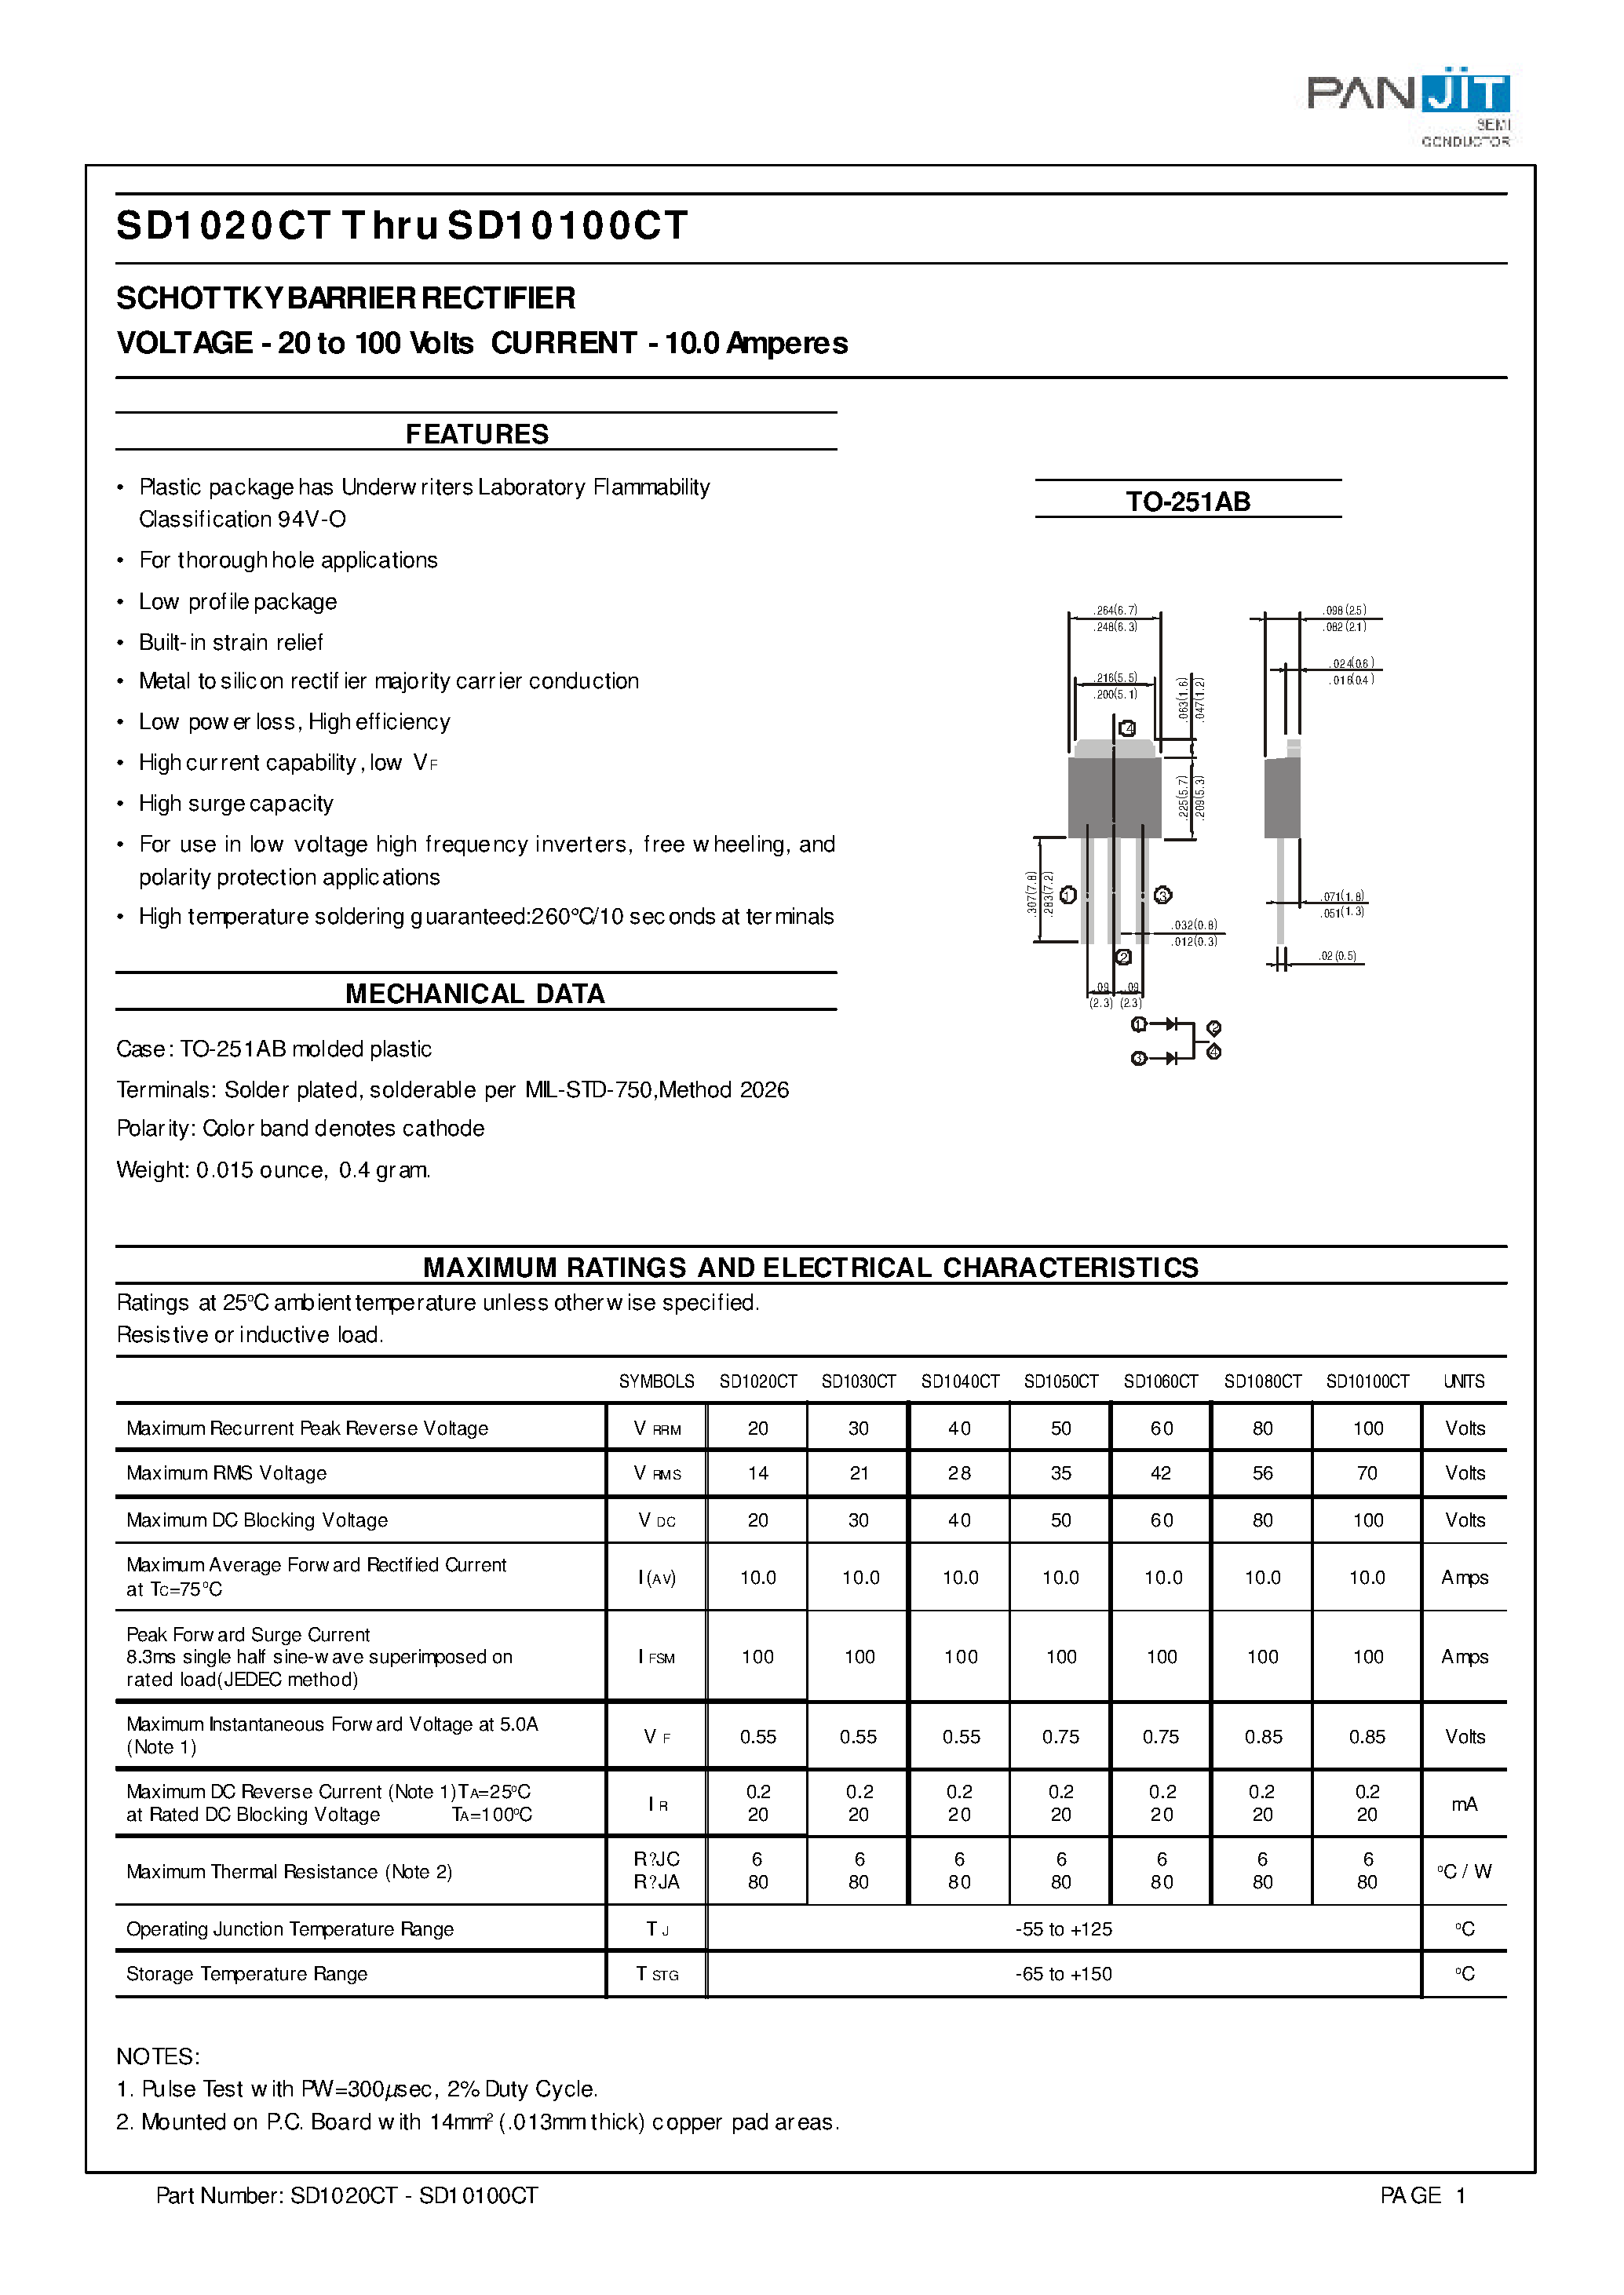 Datasheet SD10100CT - (SD1020CT - SD10100CT) SCHOTTKY BARRIER RECTIFIER page 1